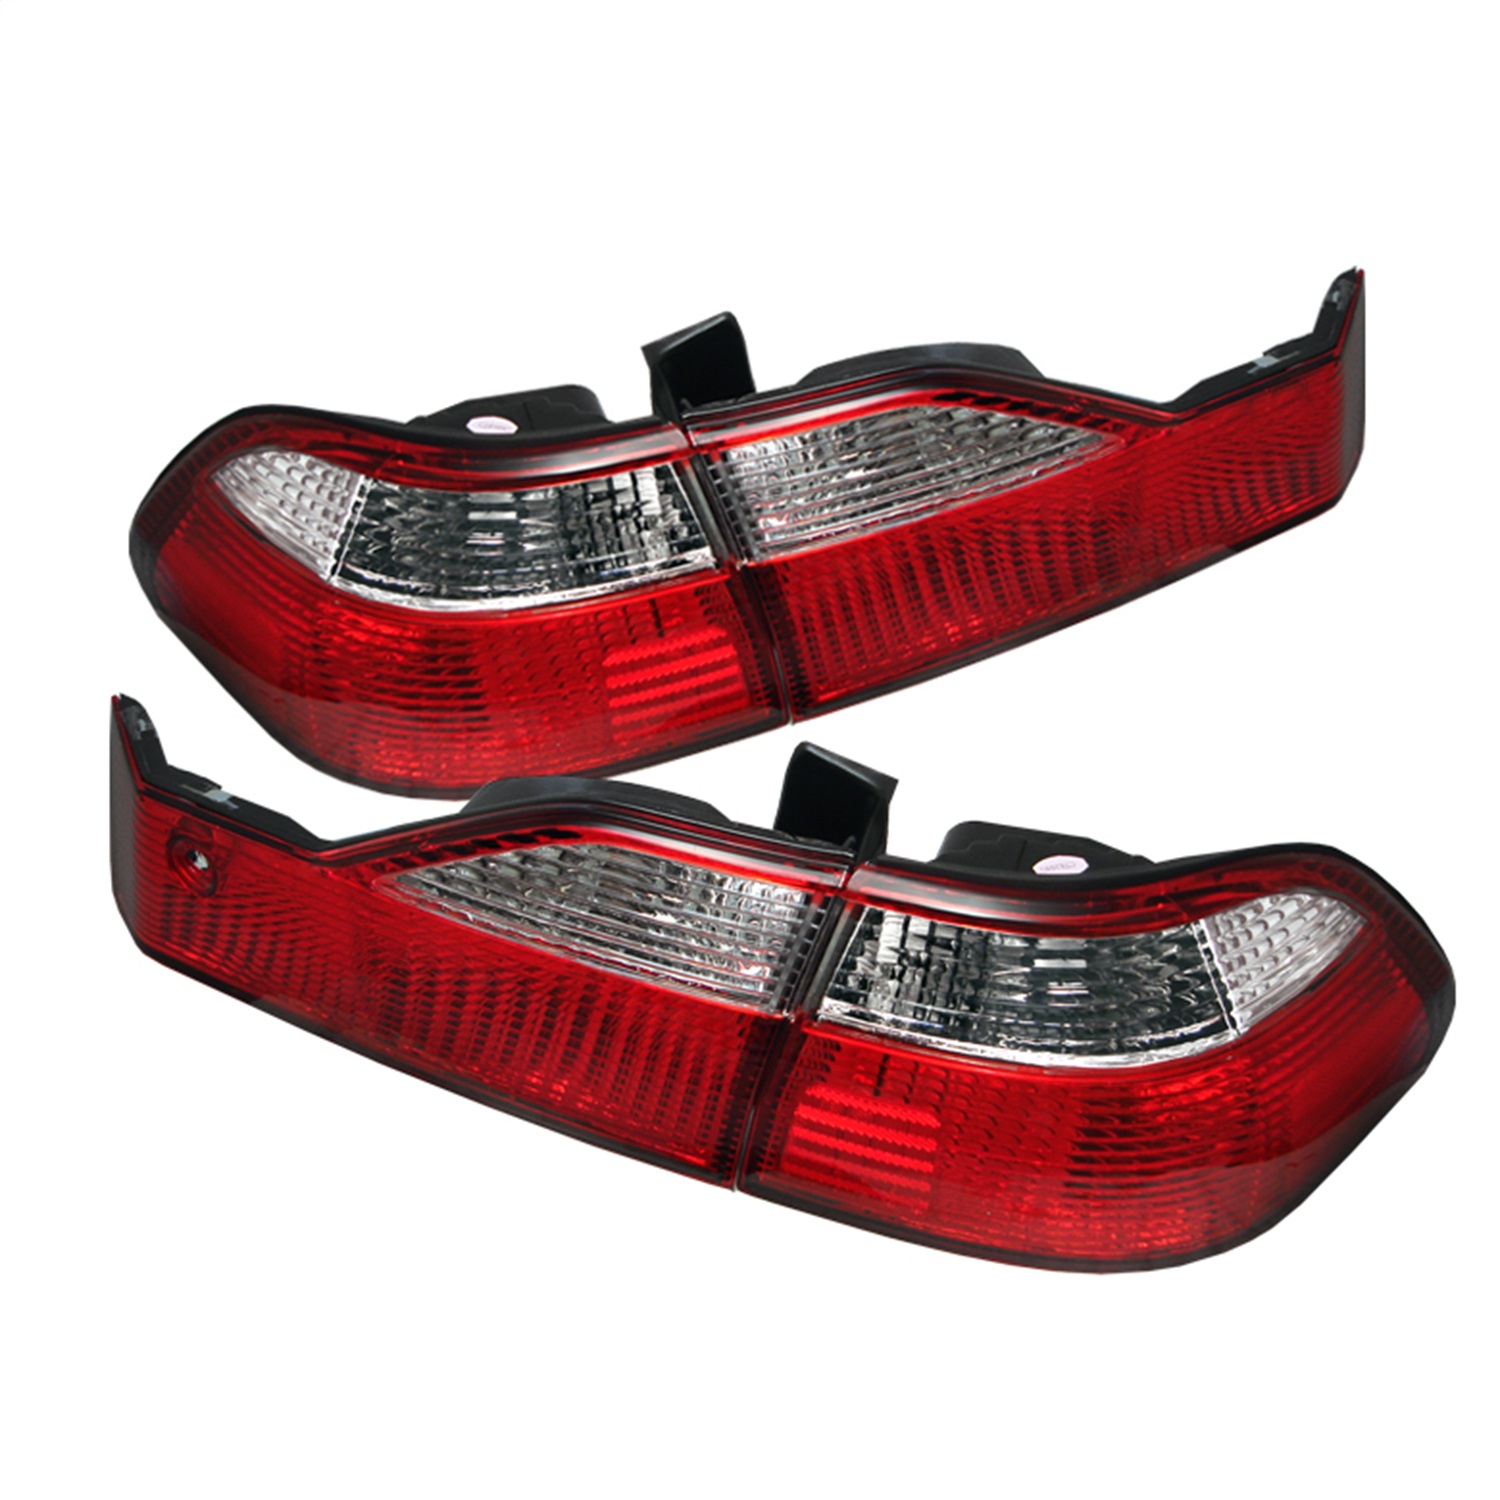 Spyder Auto 5004352 Euro Style Tail Lights Fits 98-00 Accord